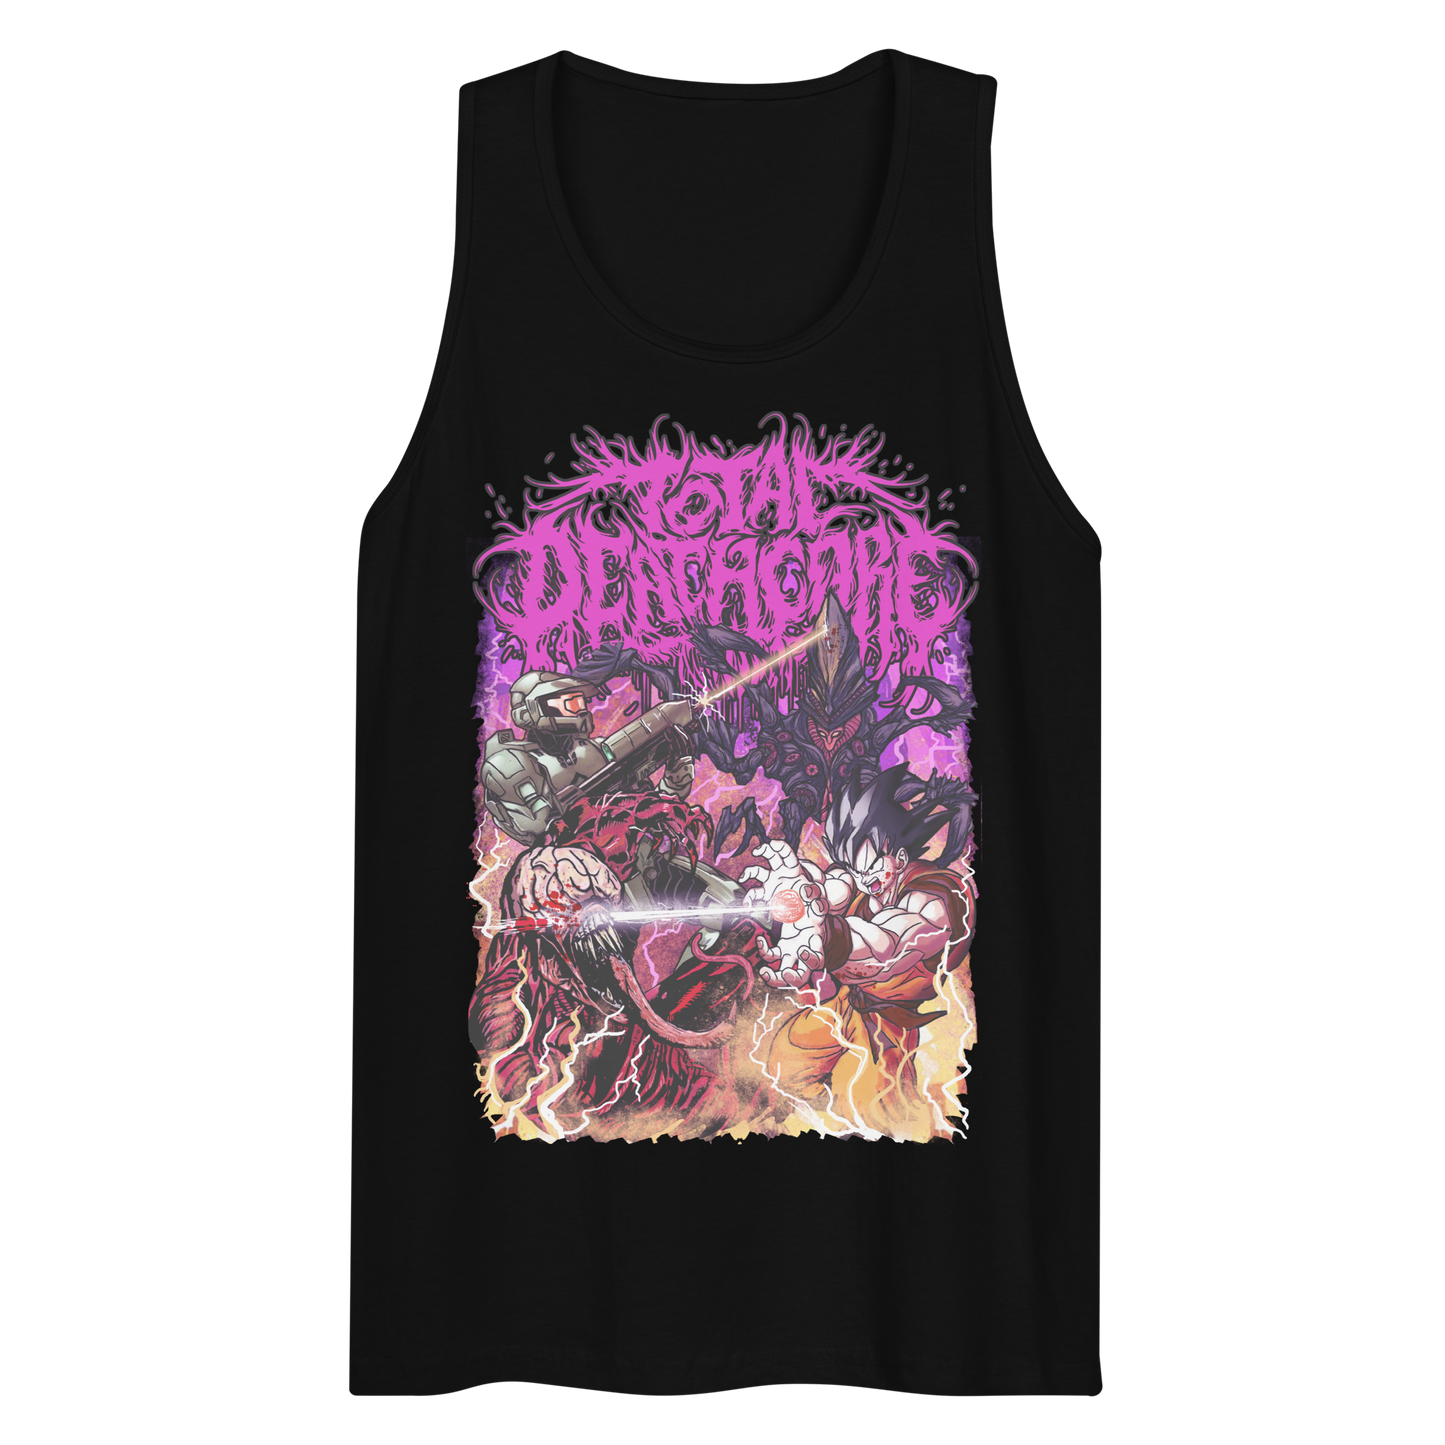 Total Deathcore "Fight For Your Life Heroes" - Men’s premium tank top